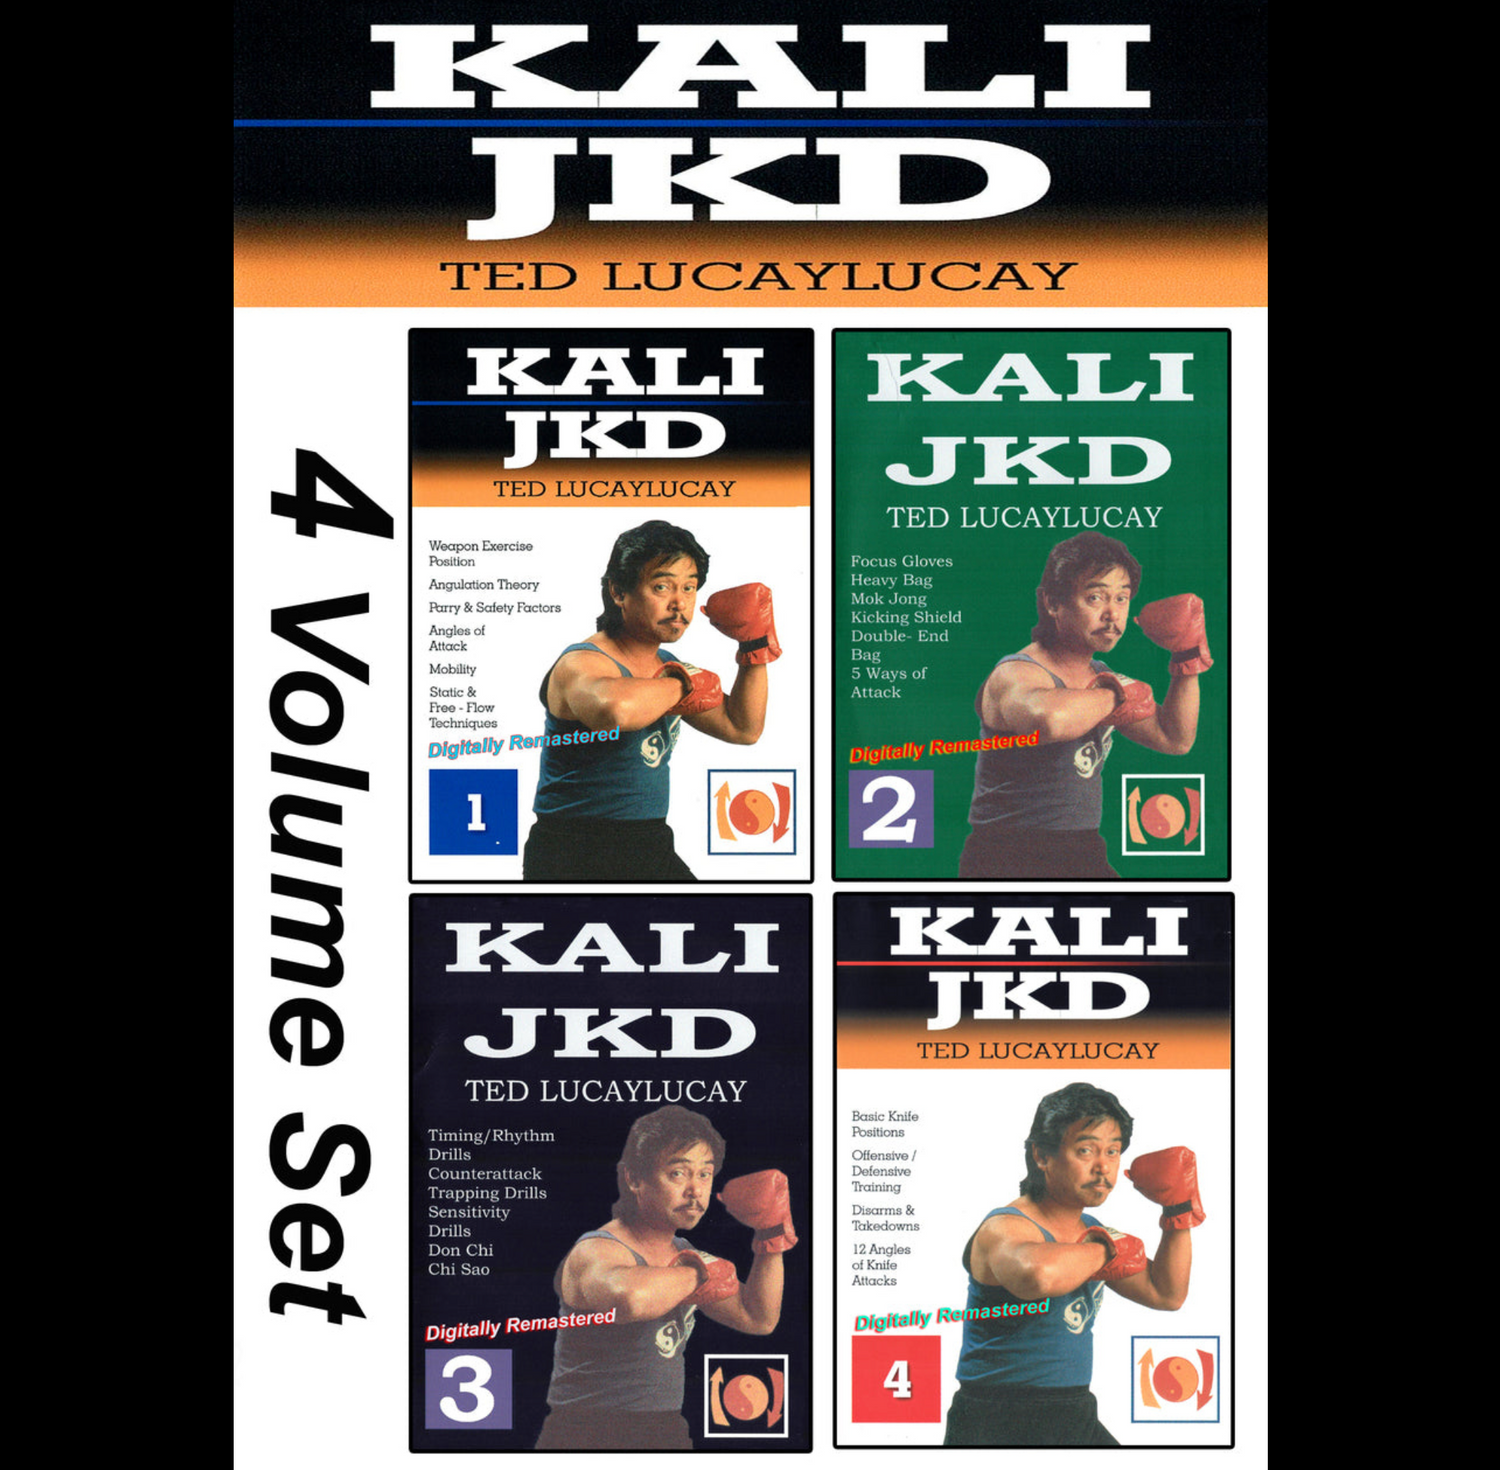 Kali JKD 4 Vol コース by Ted Lucaylucay (オンデマンド)